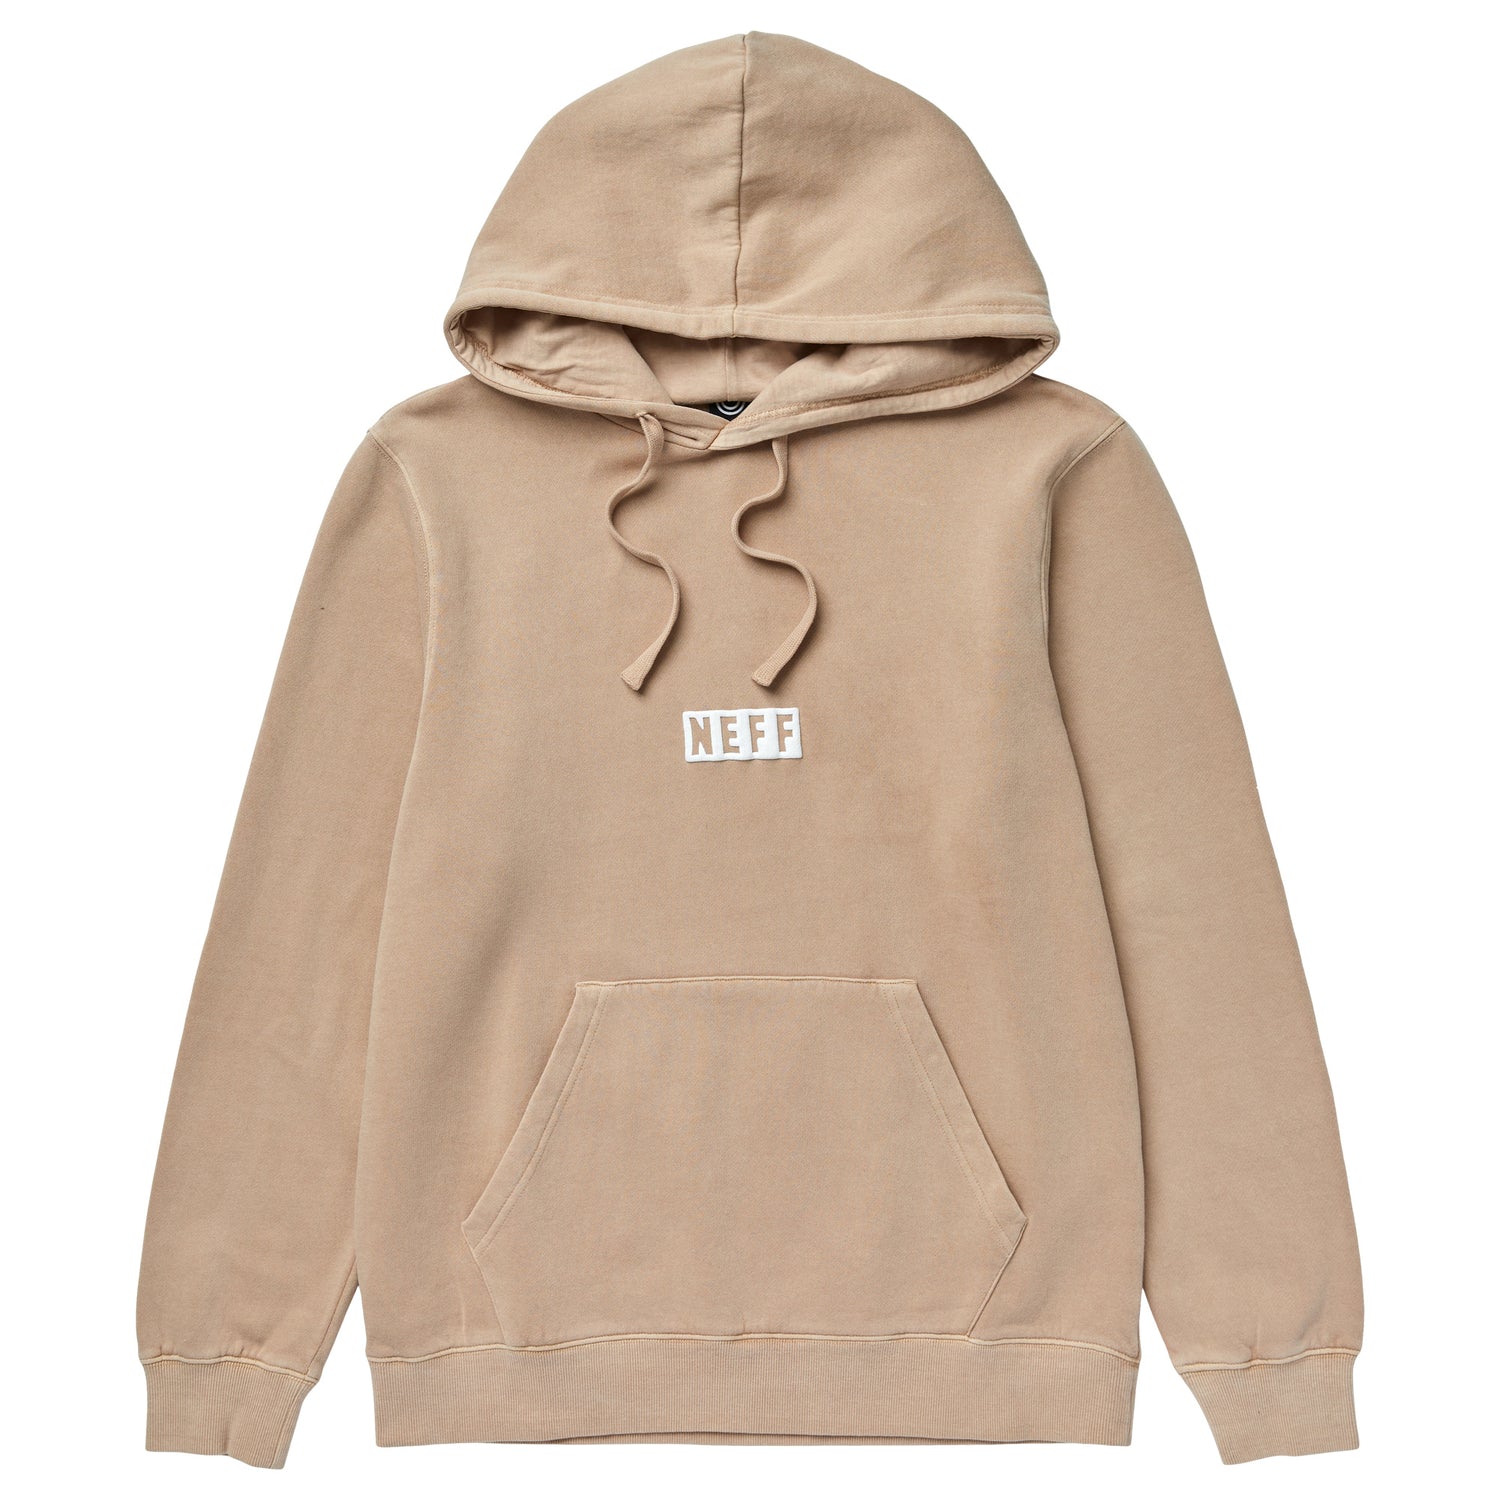 LOST IN A DREAM PULLOVER HOODIE - SAND PIGMENT